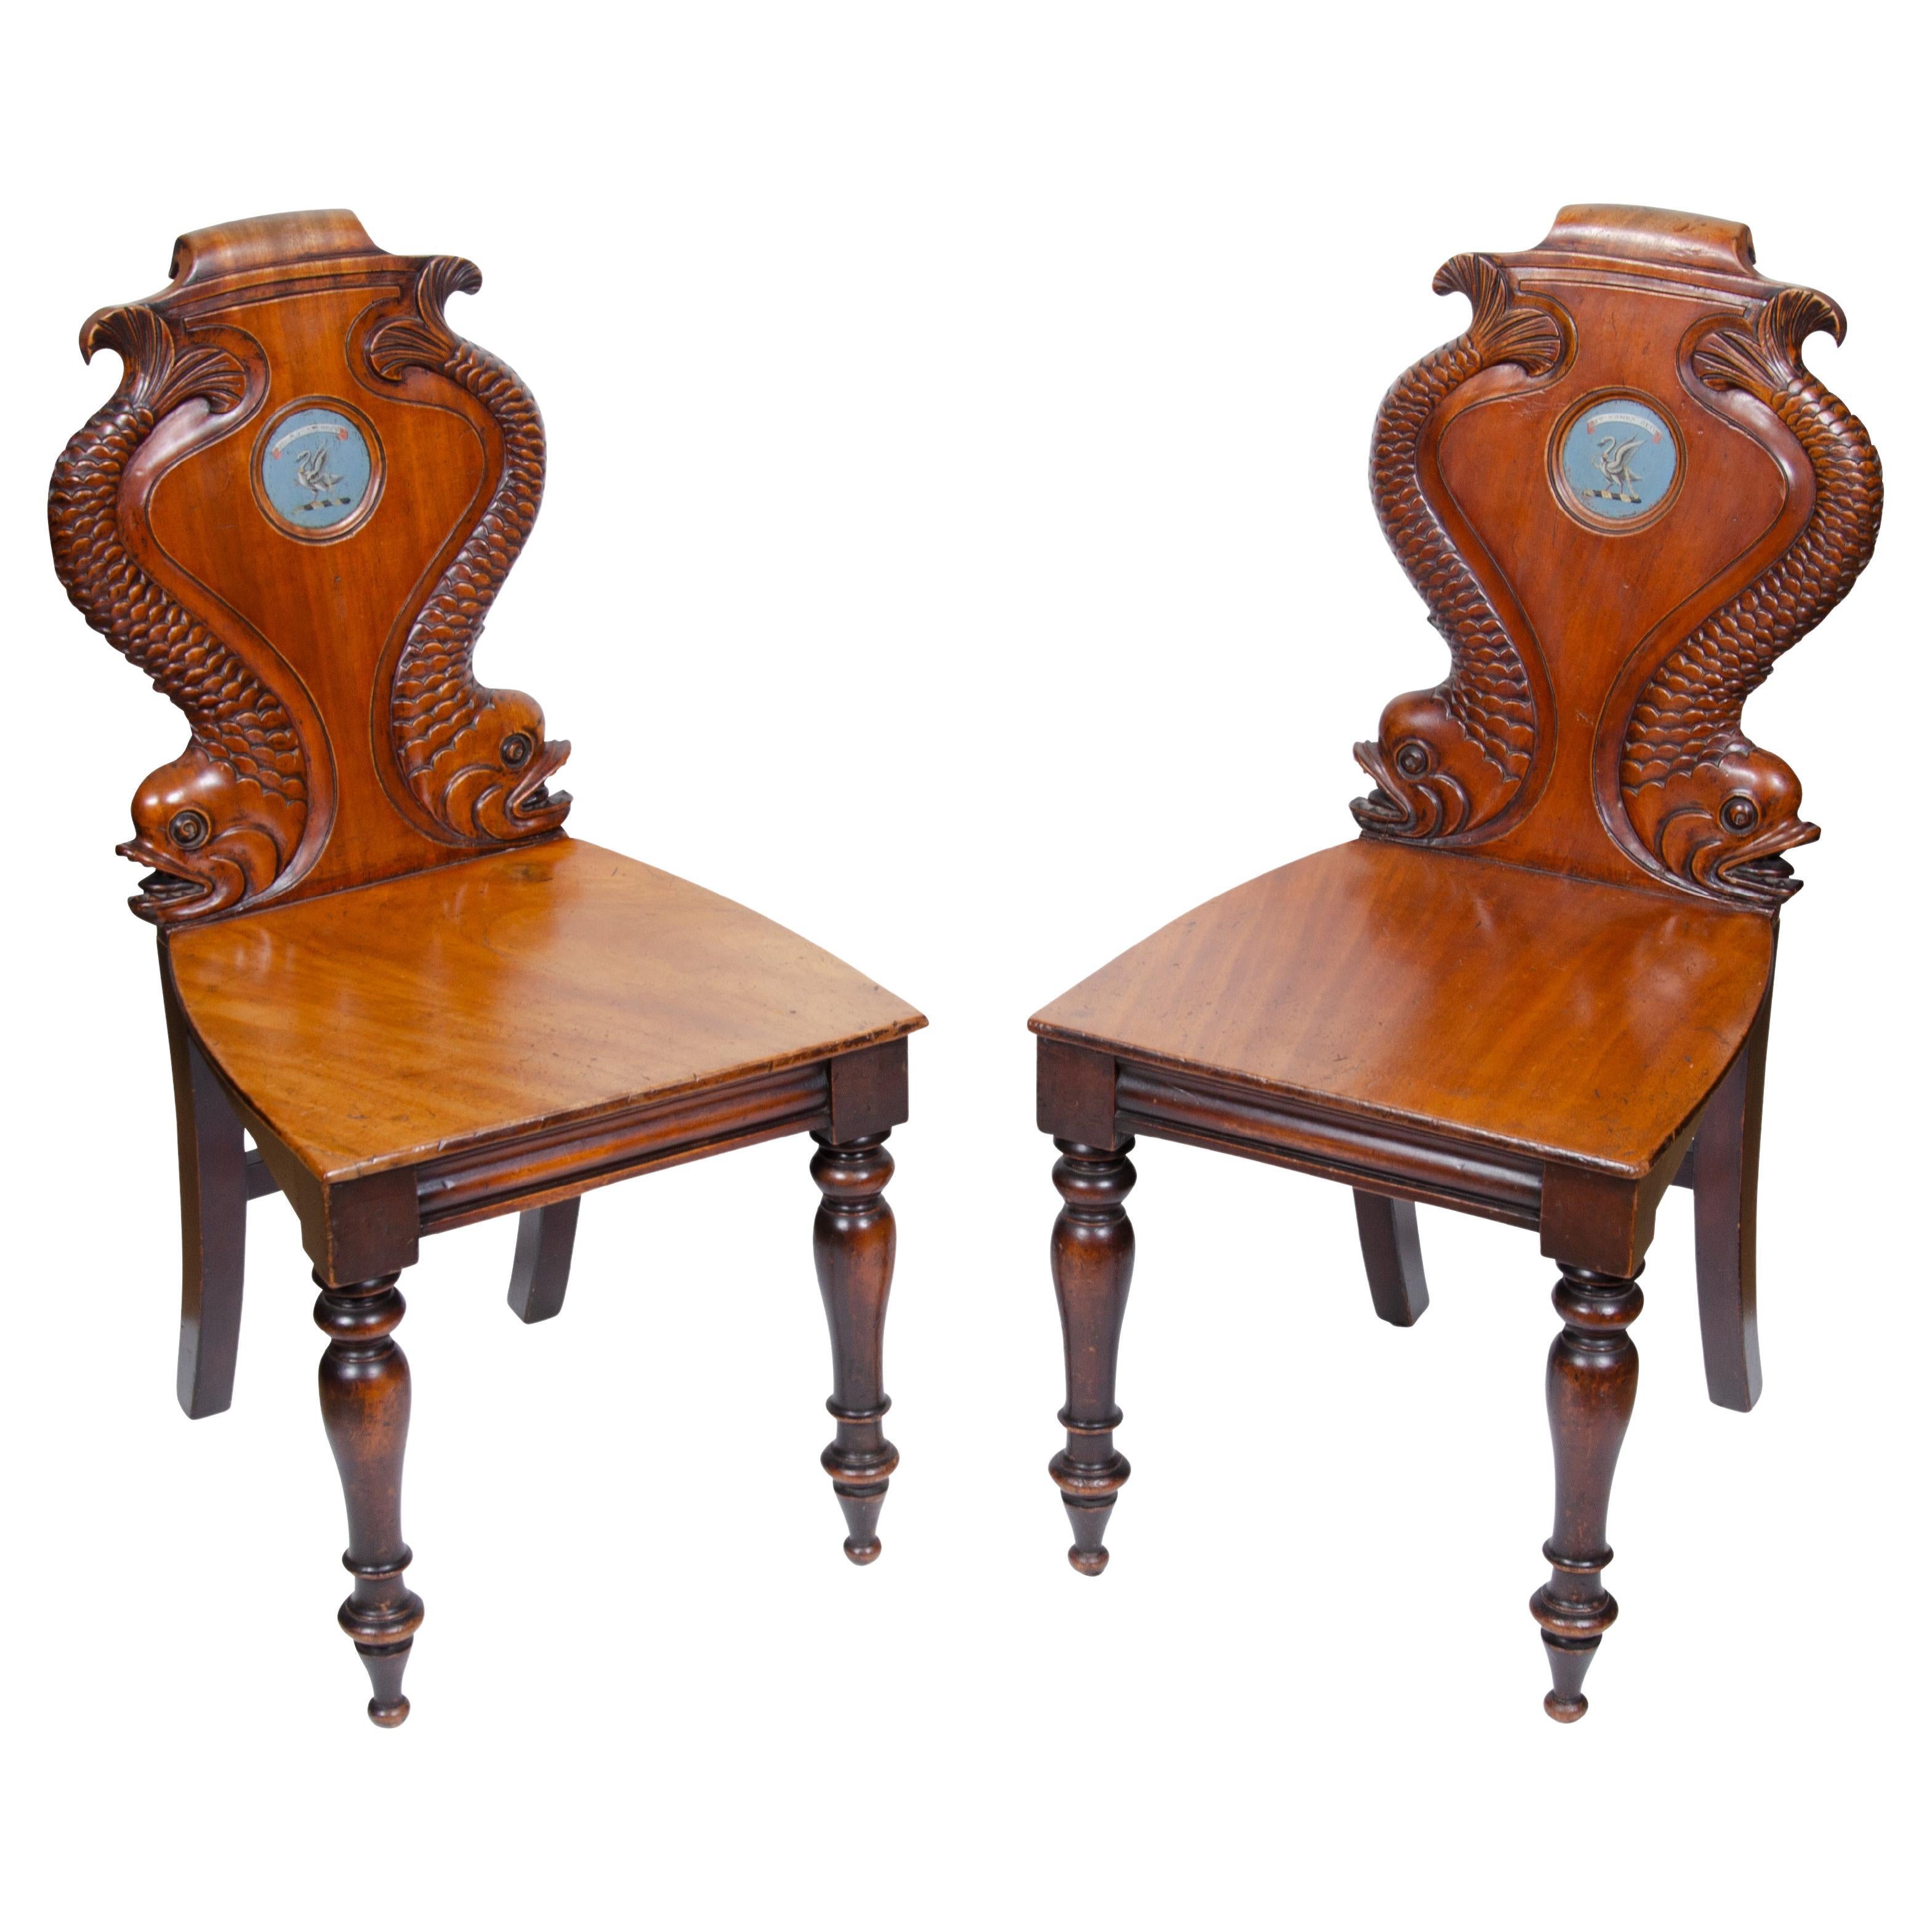 Pair of William IV Mahogany Hall Chairs with Dolphin Carved Backs